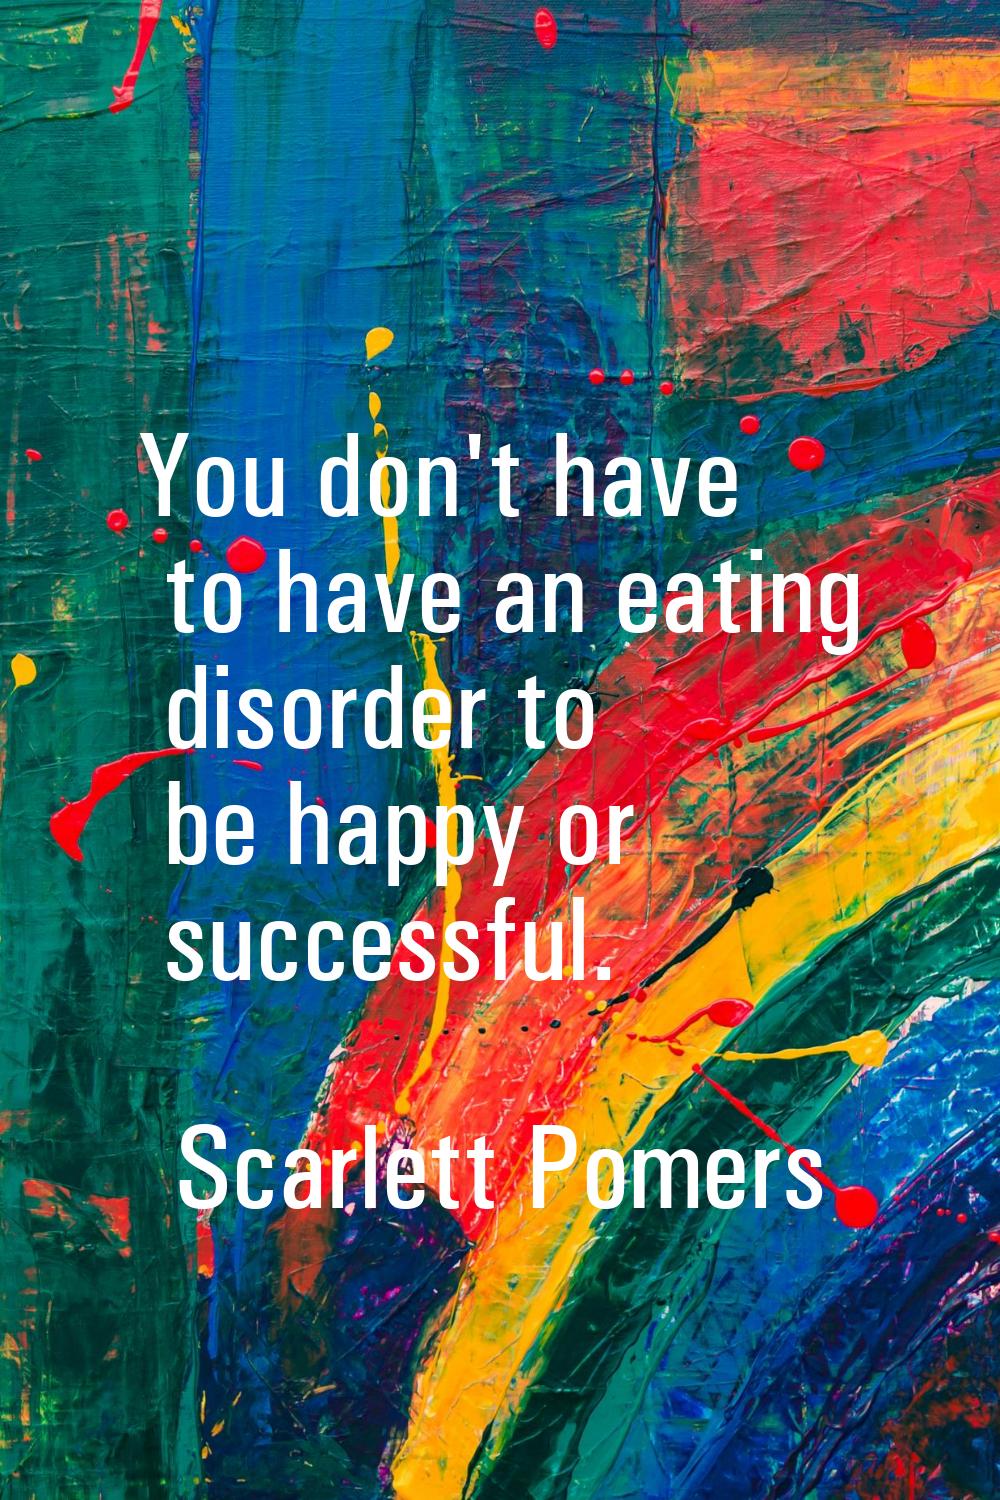 You don't have to have an eating disorder to be happy or successful.